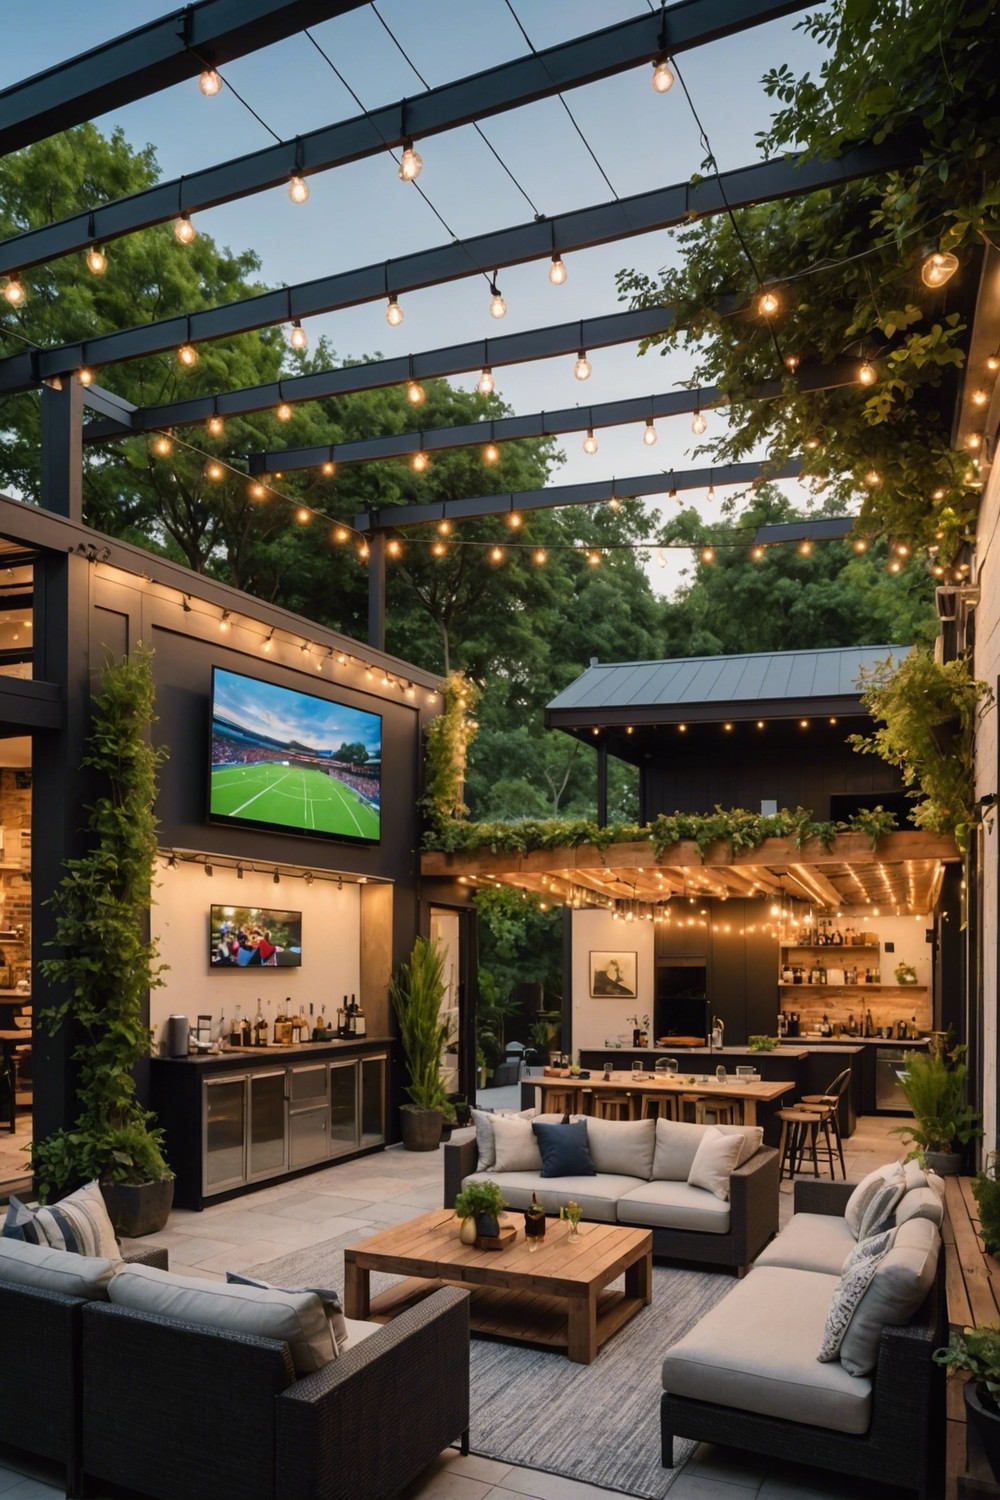 Retractable Roof for Outdoor Entertainment